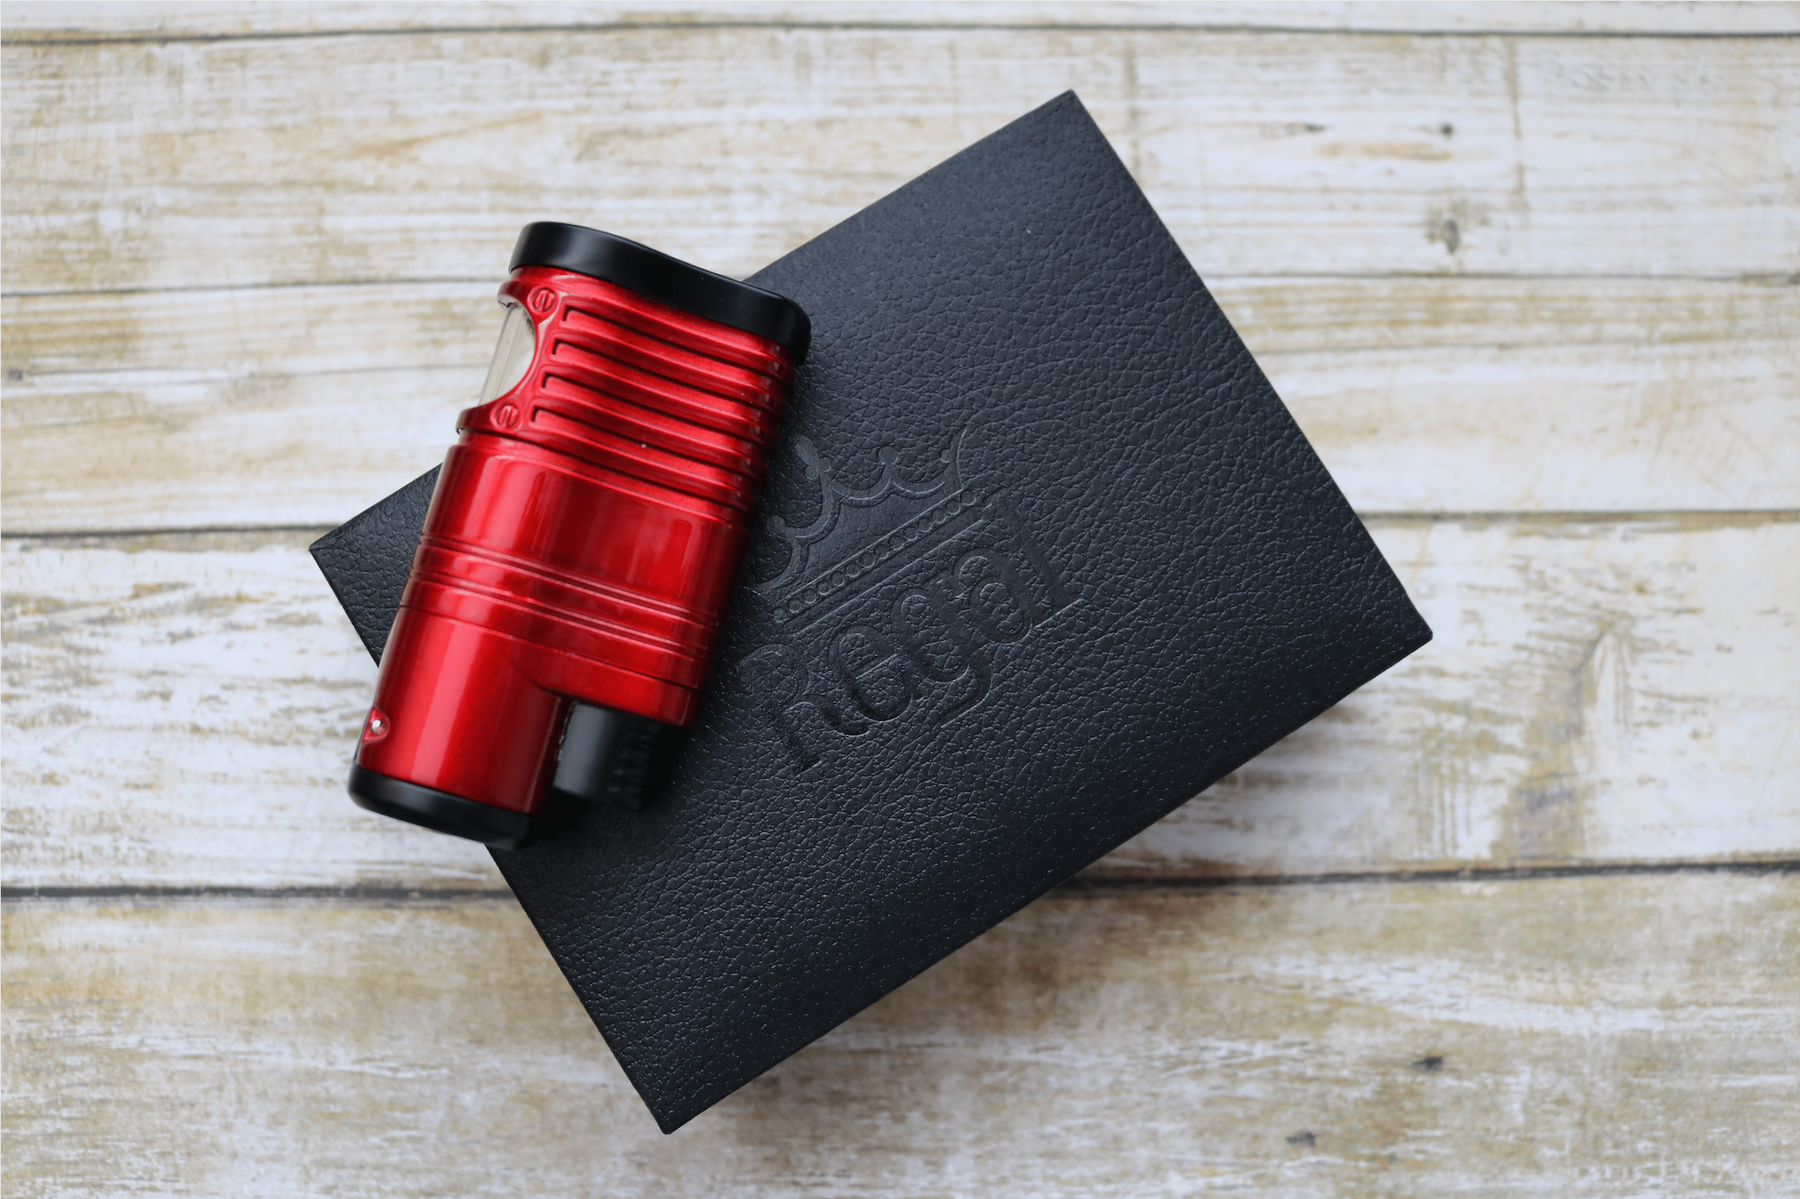 A Closer Look at the Regal Quad-Torch Red Flame Lighter - Metallic Red